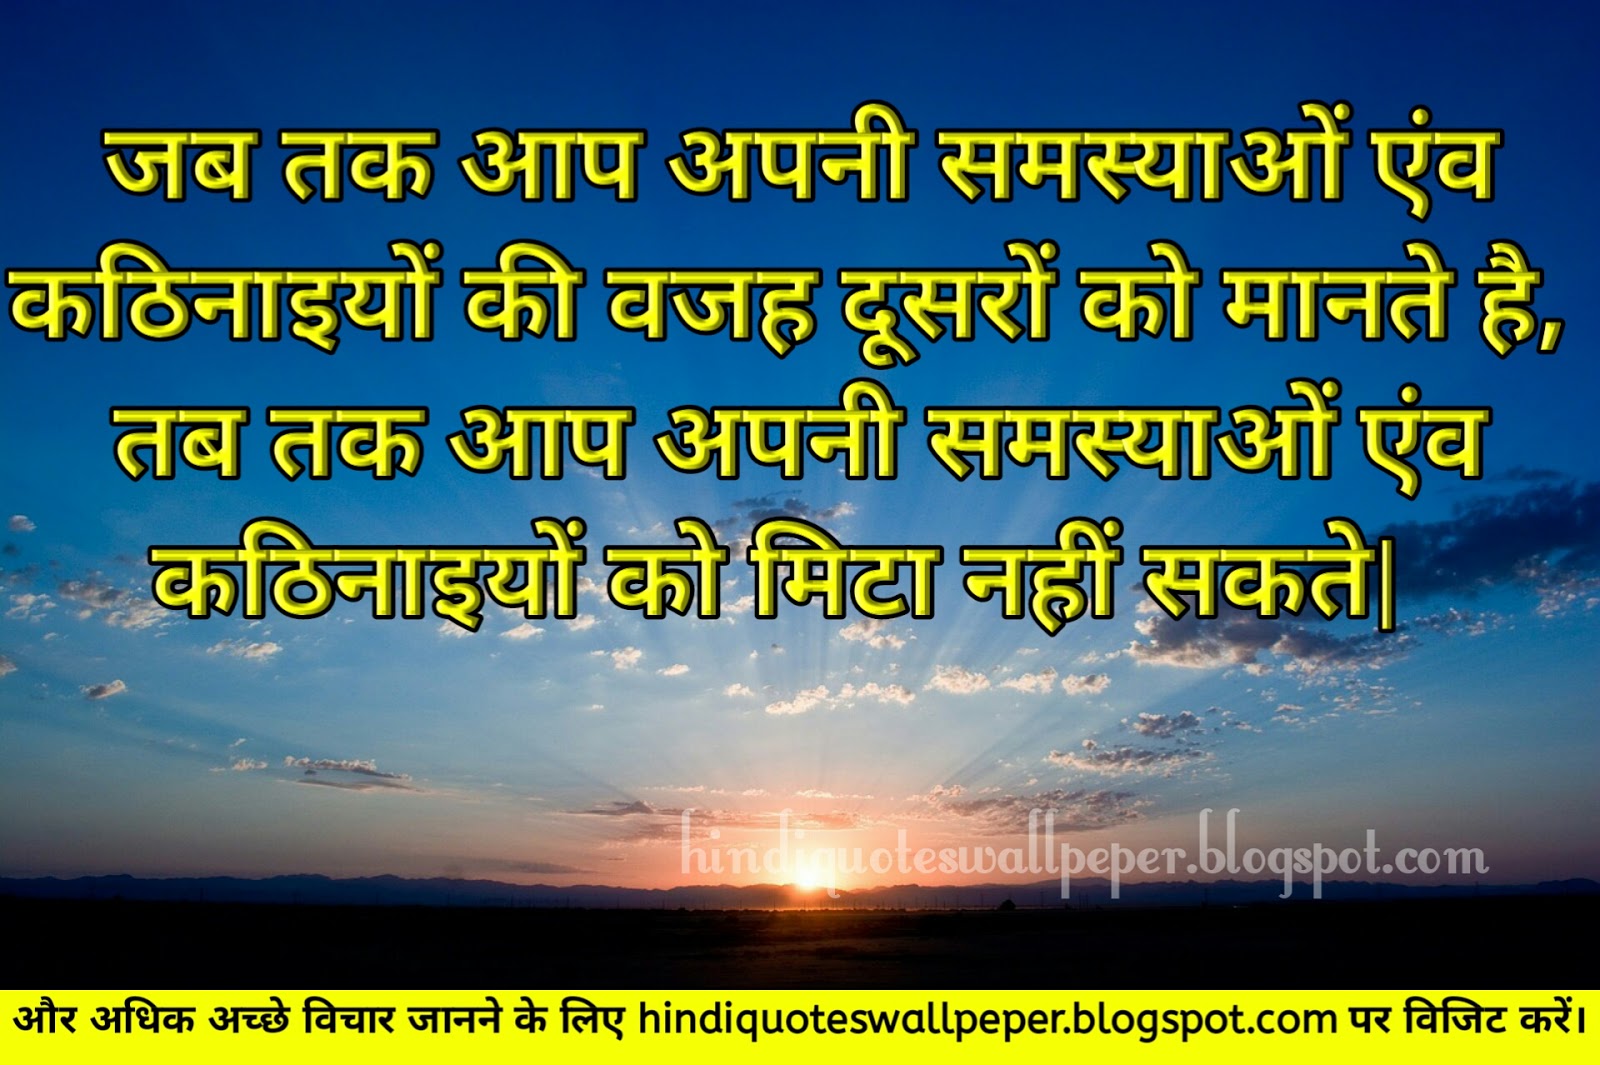 Hindi Quotes Wallpepers Best Success Quotes In Hindi